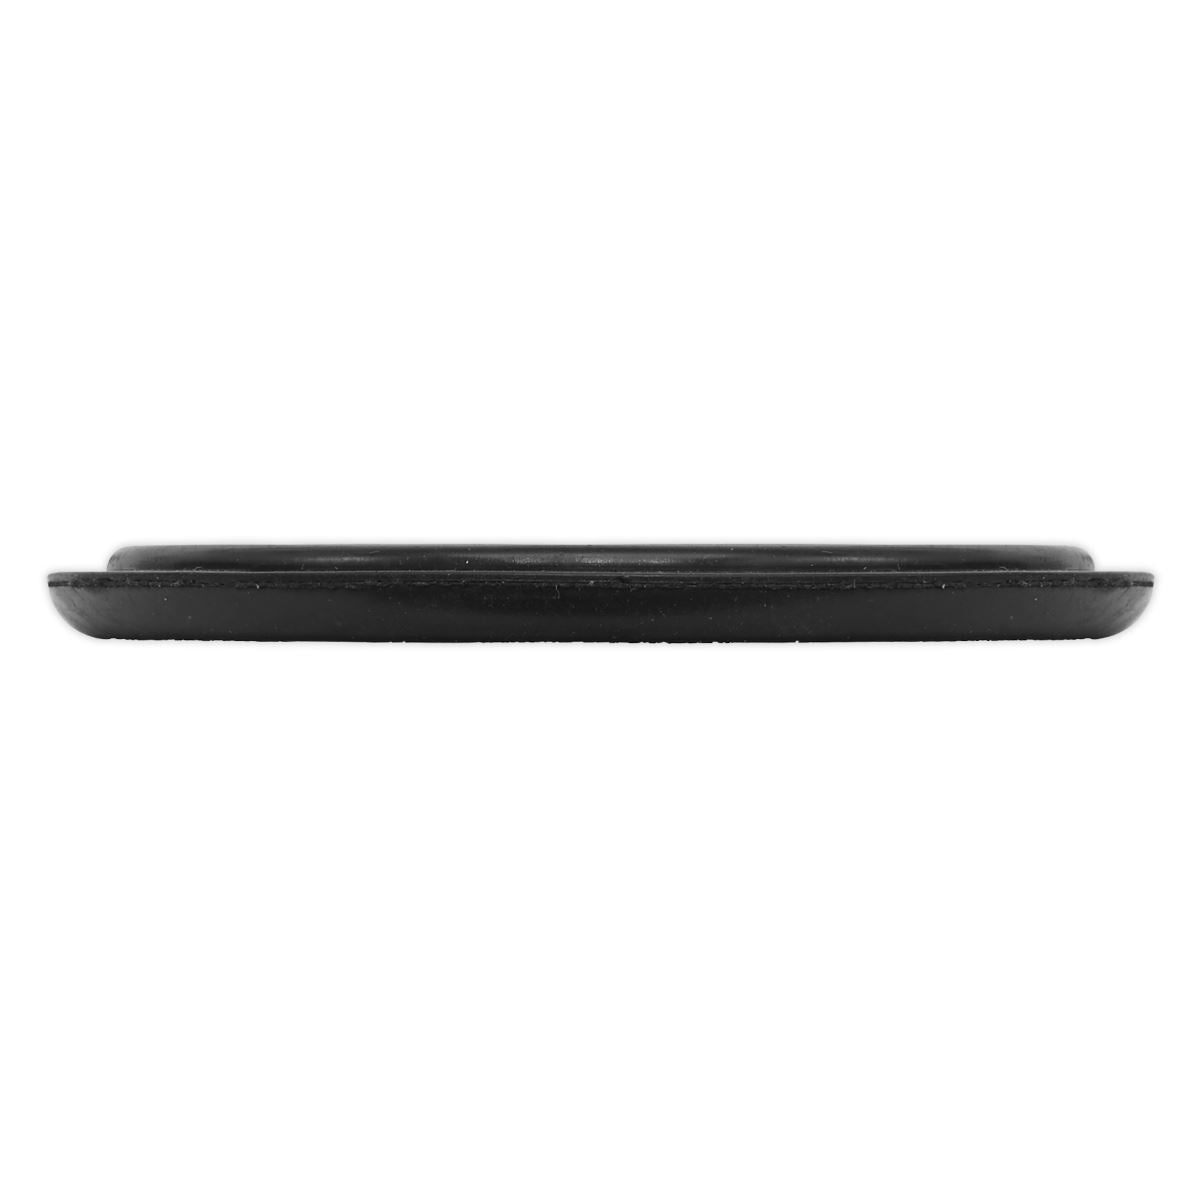 Sealey Safety Rubber Trolley Jack Pad Type B To Fit 90-95mm Saddle